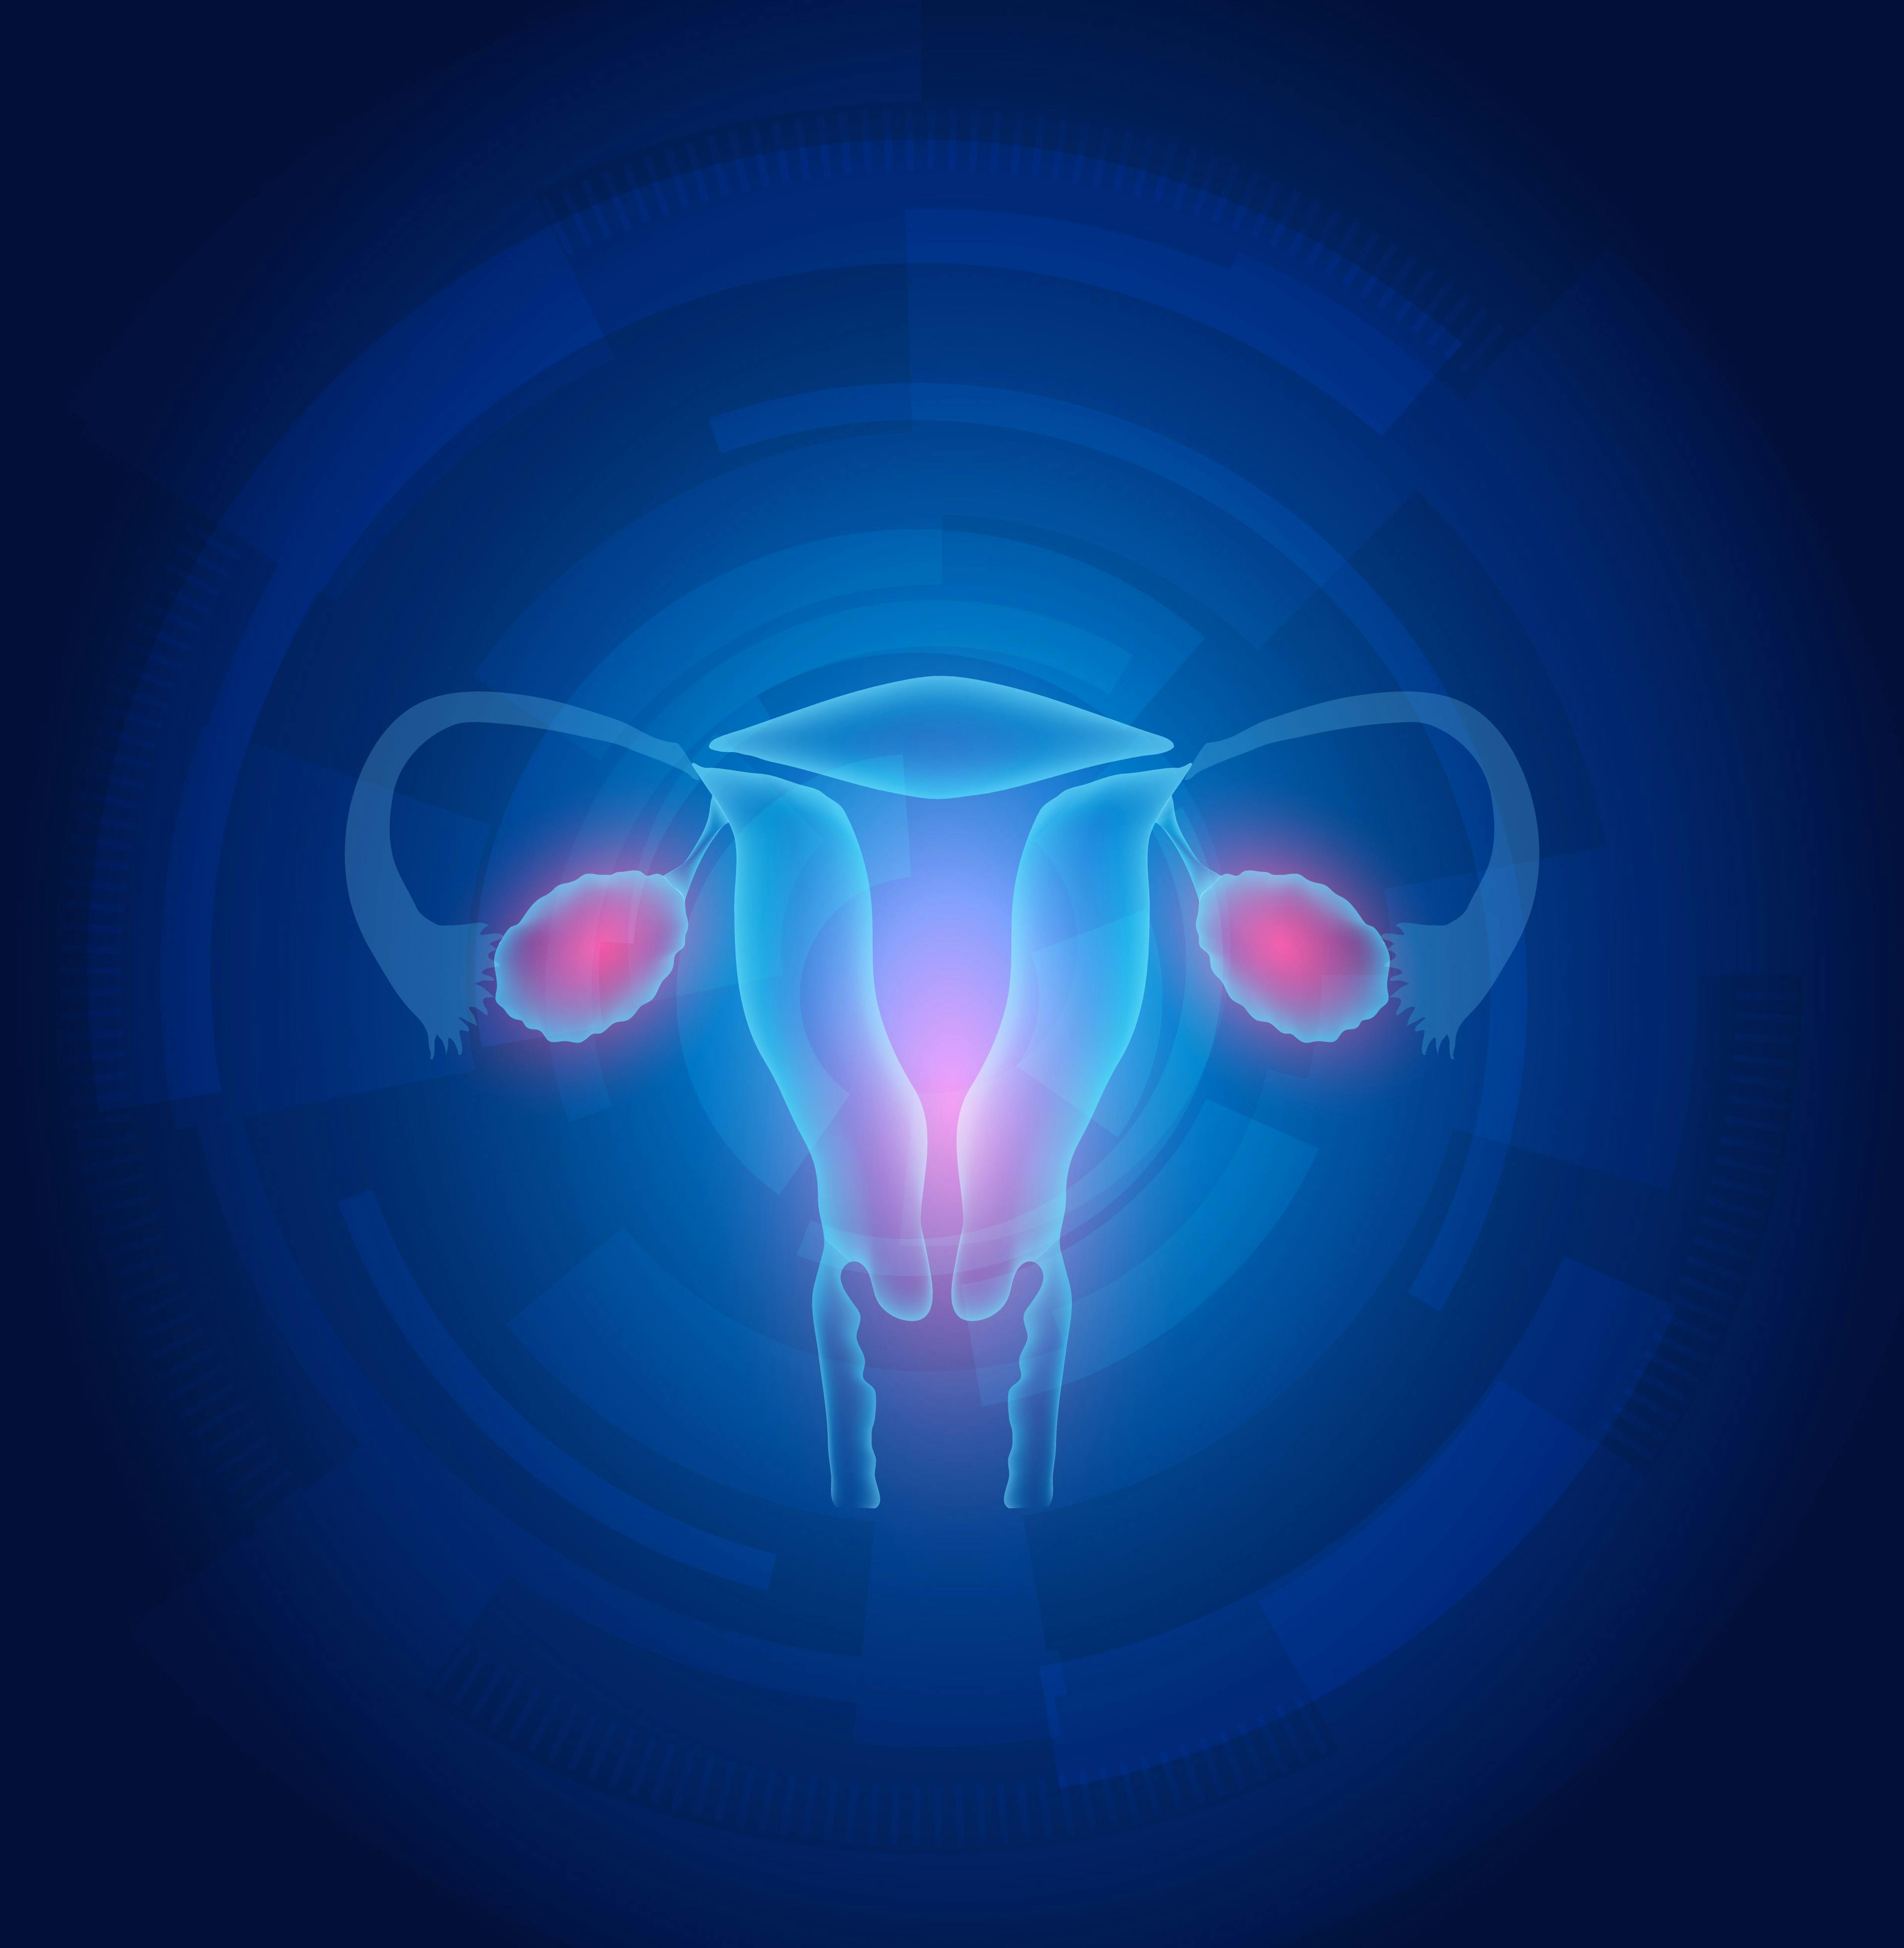 The FDA has granted IN10018 a fast track designation for the treatment of patients with platinum-resistant ovarian cancer.